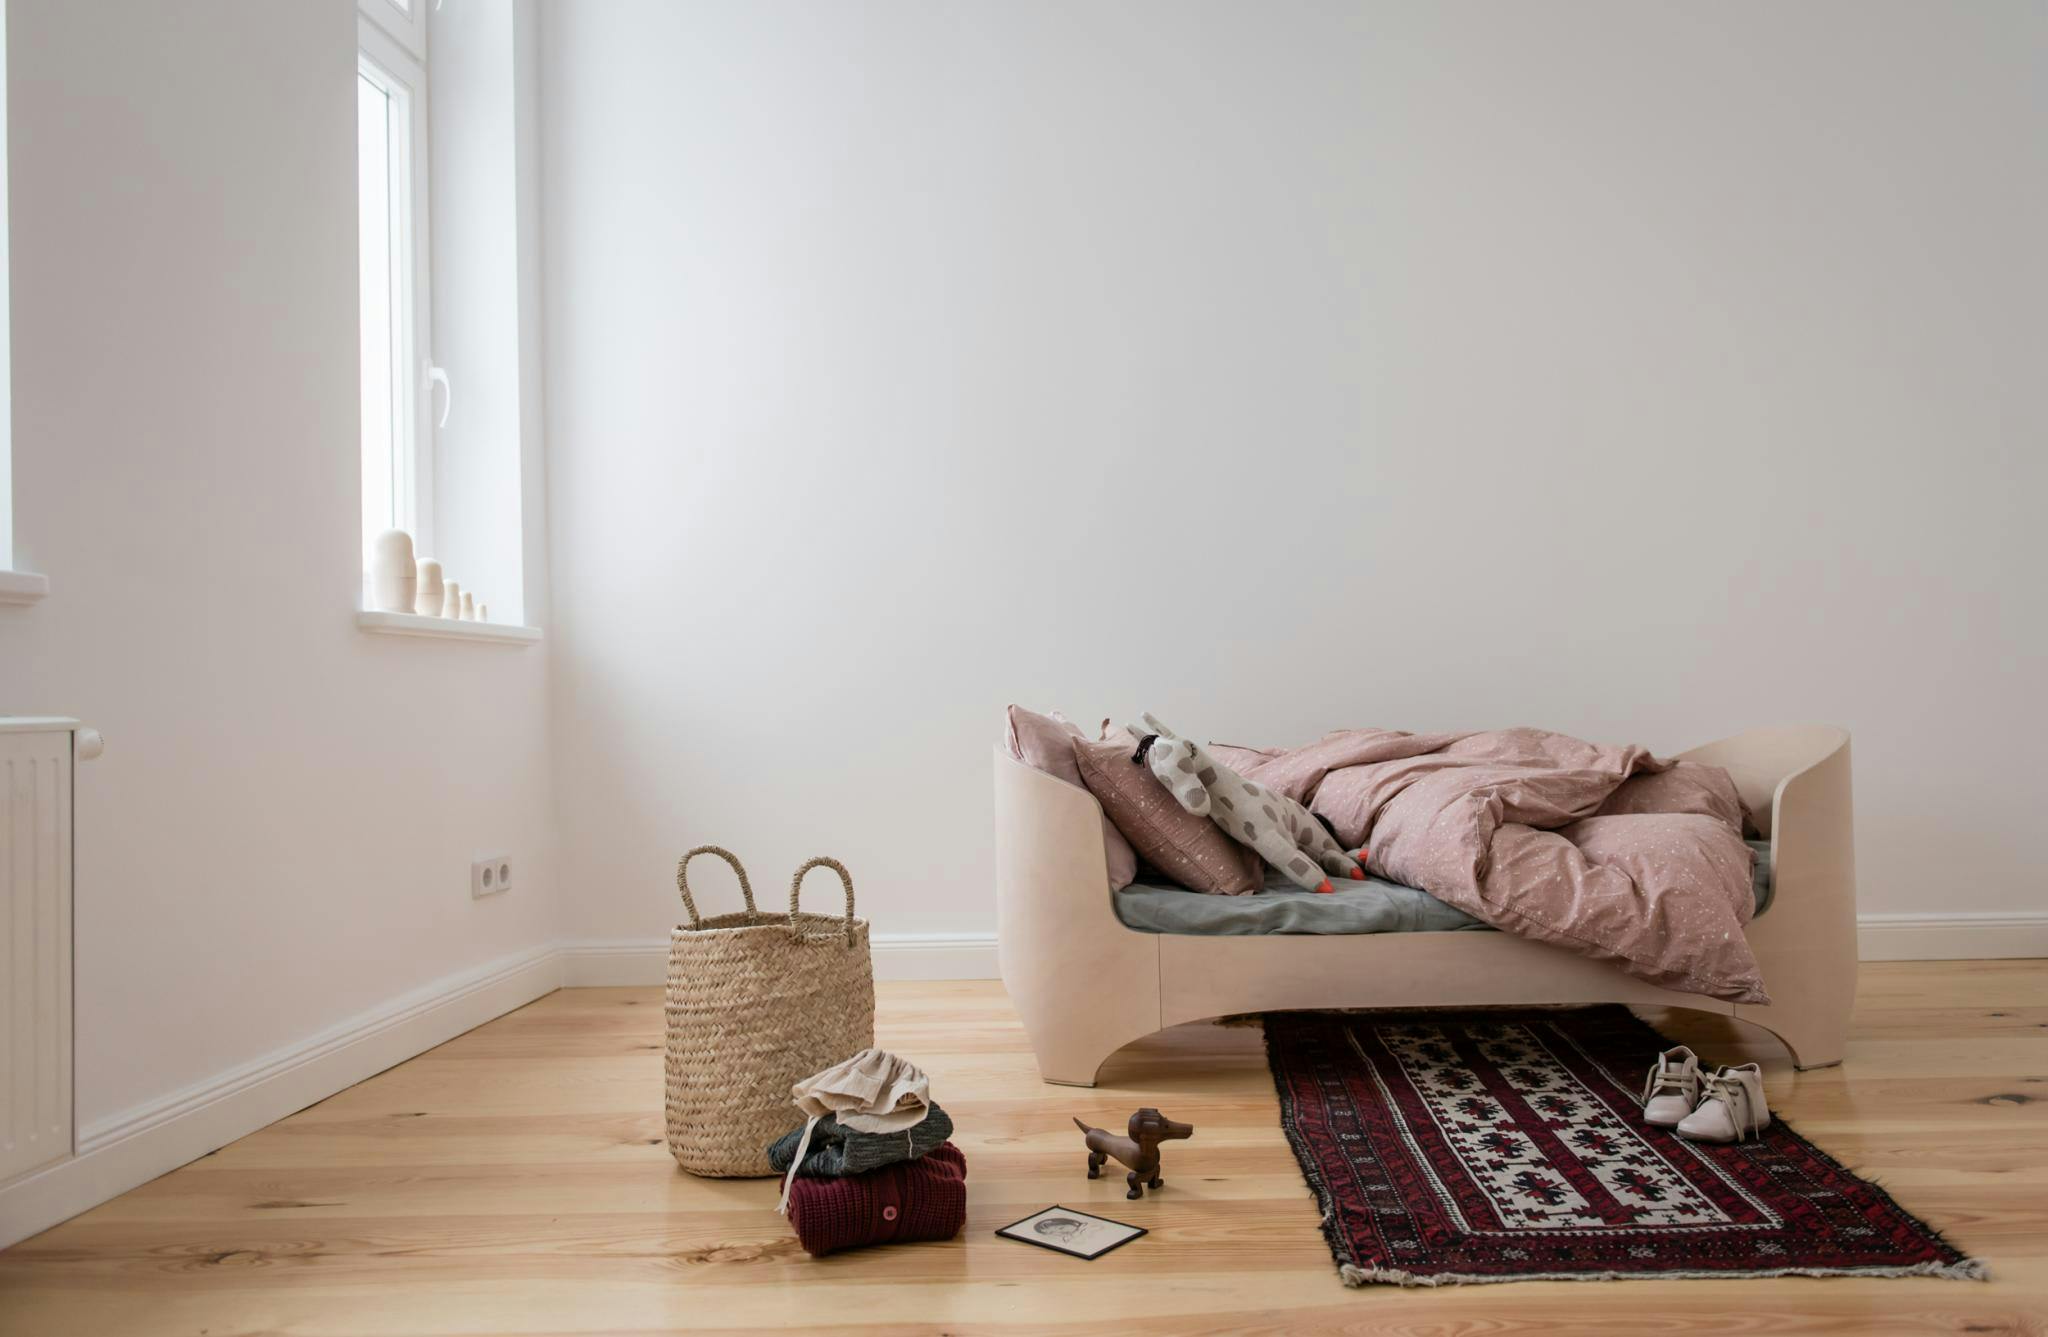 The image features a small, white couch in a room with a wooden floor. The couch is placed in the center of the room, and a basket is placed next to it. There are two handbags on the floor, one near the couch and the other slightly further away. 

In addition to the couch and handbags, there are two books on the floor, one closer to the couch and the other slightly further away. A remote control is also visible on the floor, likely for controlling the television or other electronic devices in the room.